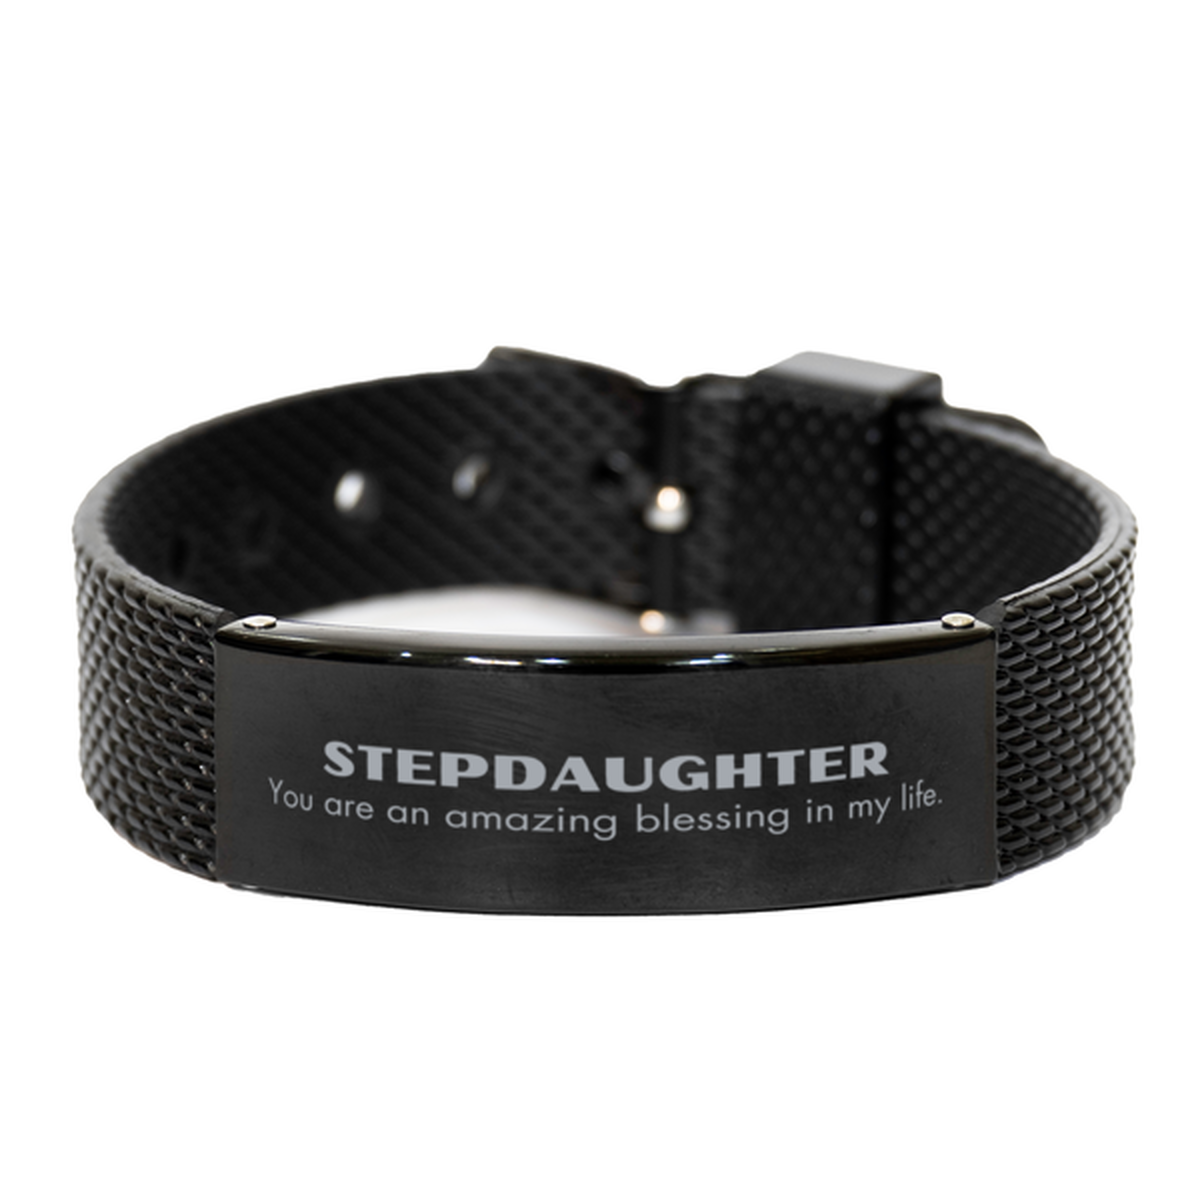 Stepdaughter Black Shark Mesh Bracelet, You are an amazing blessing in my life, Thank You Gifts For Stepdaughter, Inspirational Birthday Christmas Unique Gifts For Stepdaughter